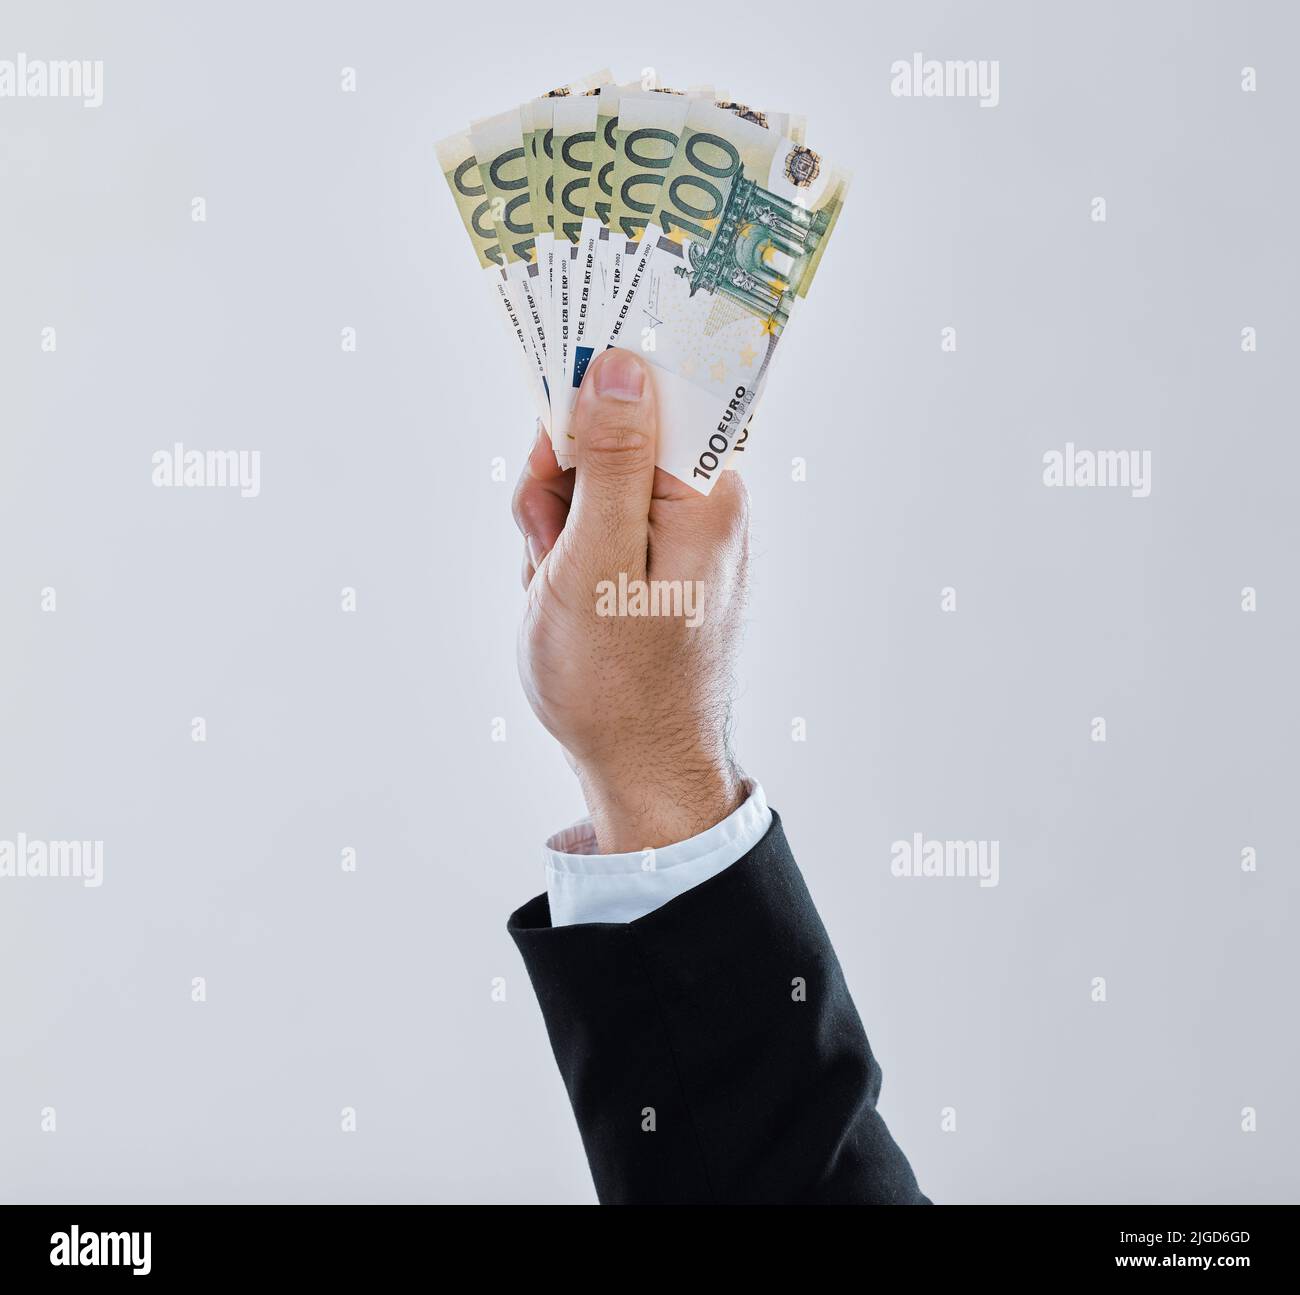 Power doesnt corrupt people, people corrupt power. a businessman stretching out his hand holding money against a grey background. Stock Photo